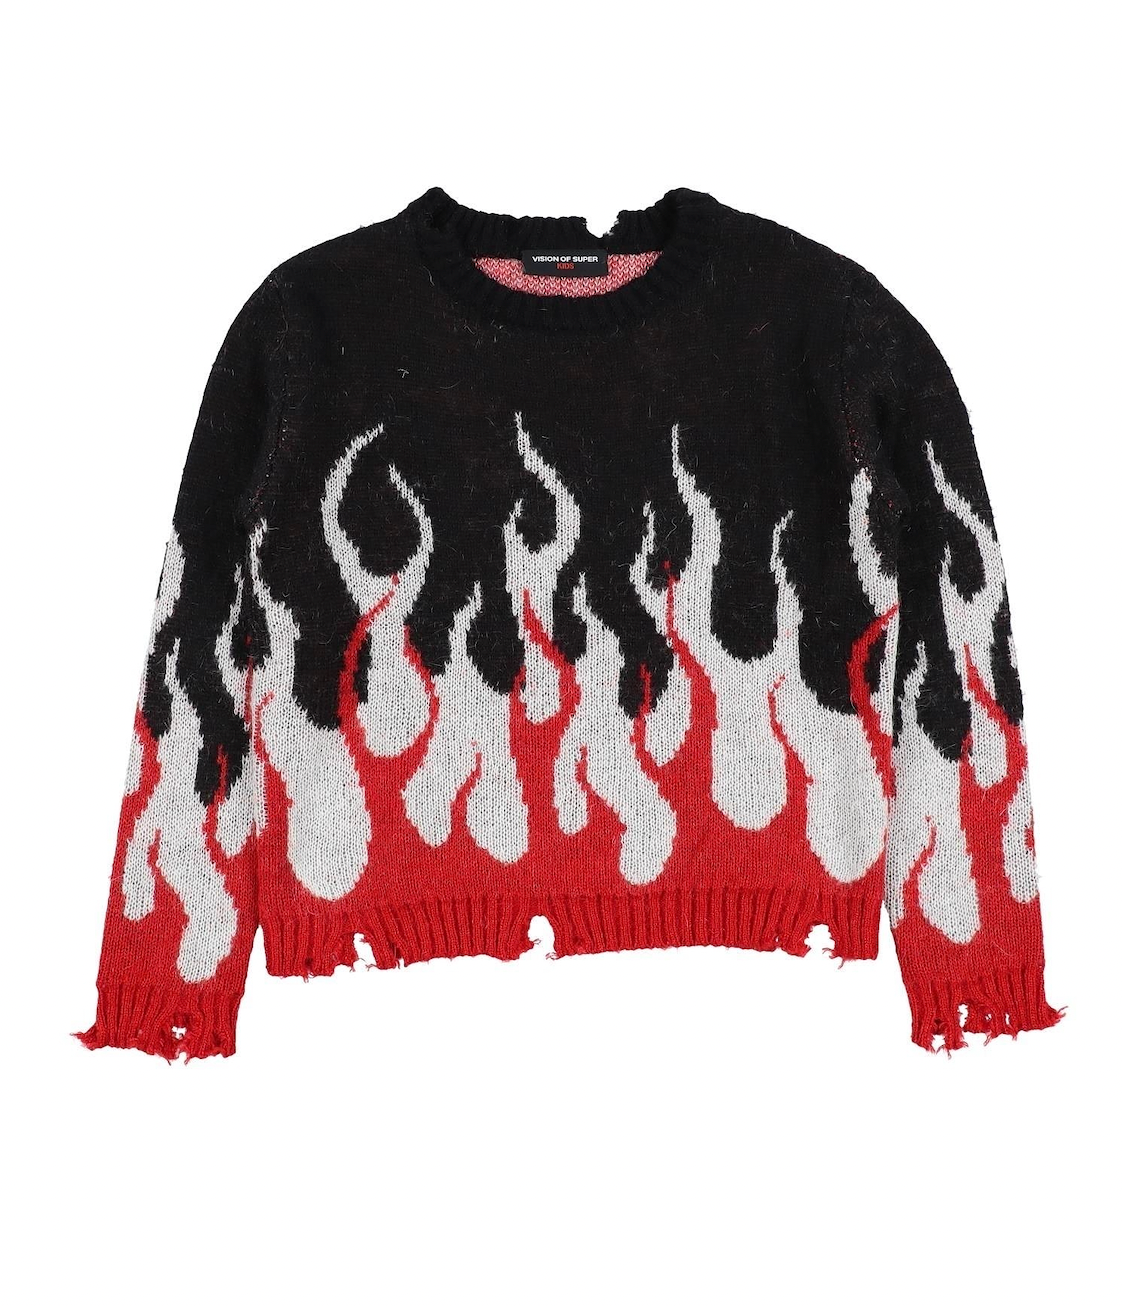 VISION OF SUPER - Black jumper with red &amp; white flames - 12 years old